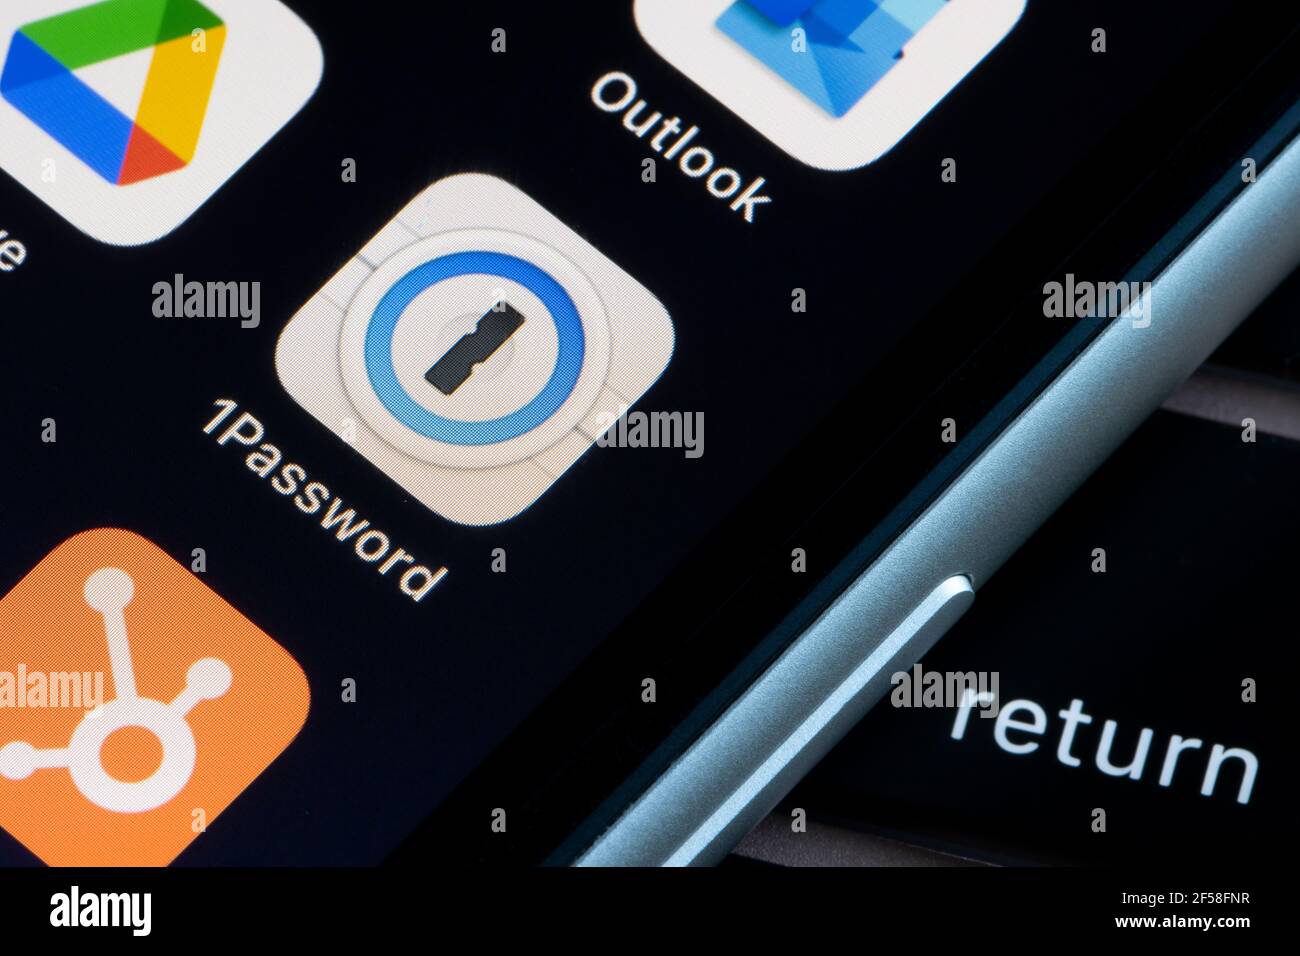 1Password mobile app icon is seen on an iPhone. 1Password is a password manager developed by AgileBits, Inc. Stock Photo